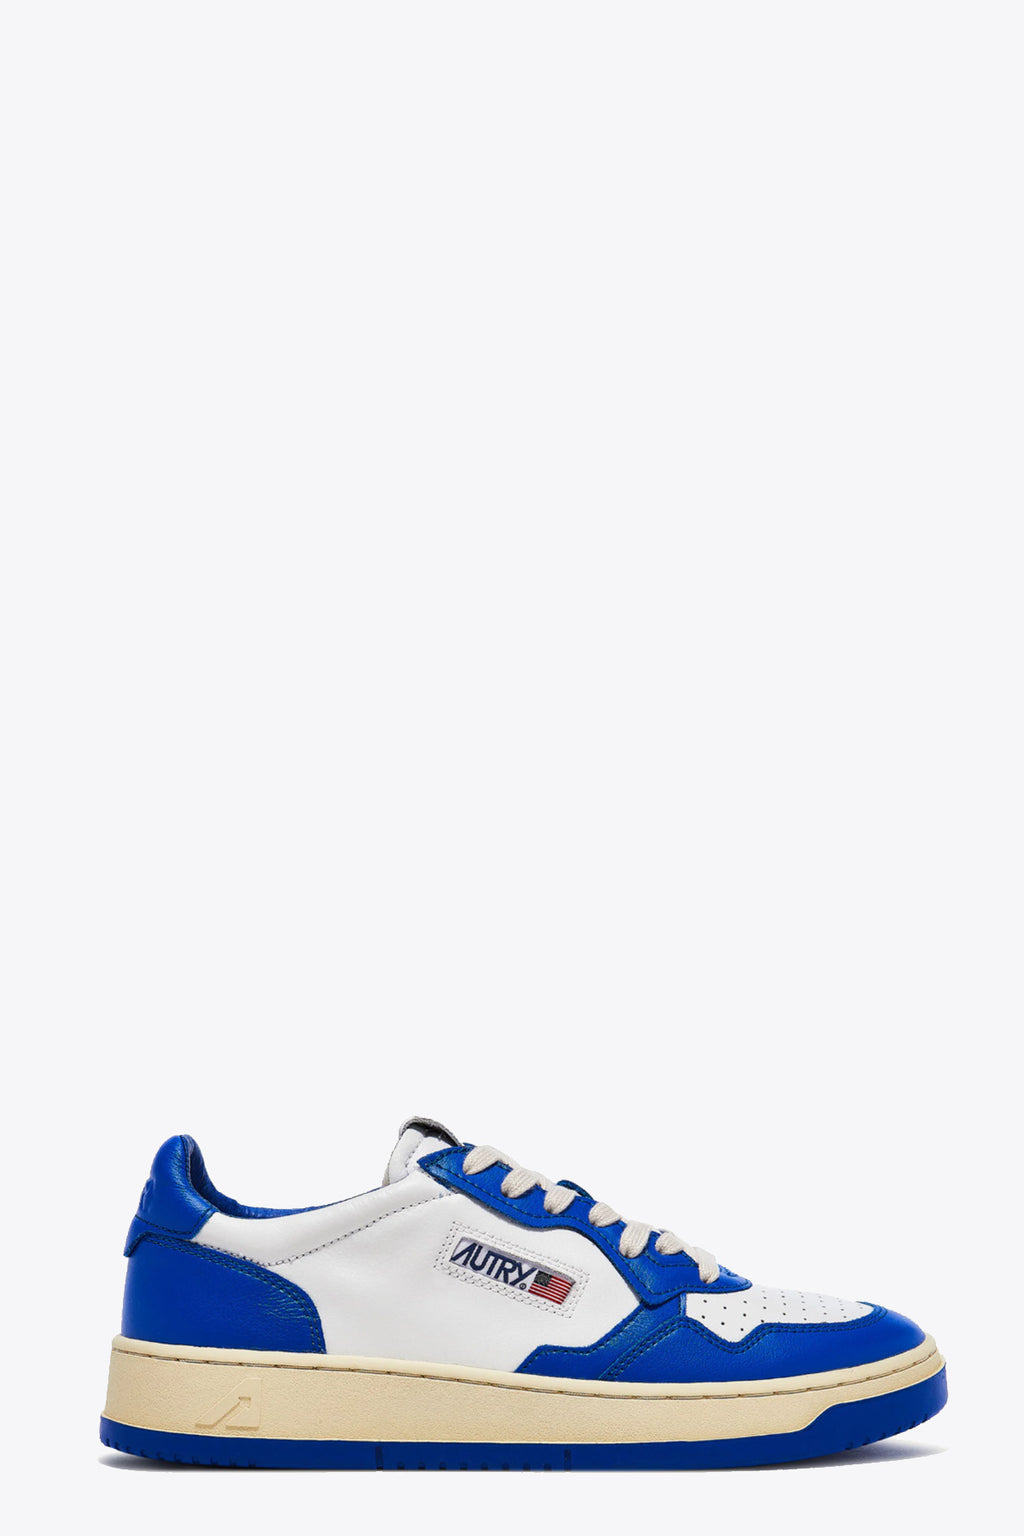 alt-image__White-and-royal-blue-leather-low-sneaker---Medalist-